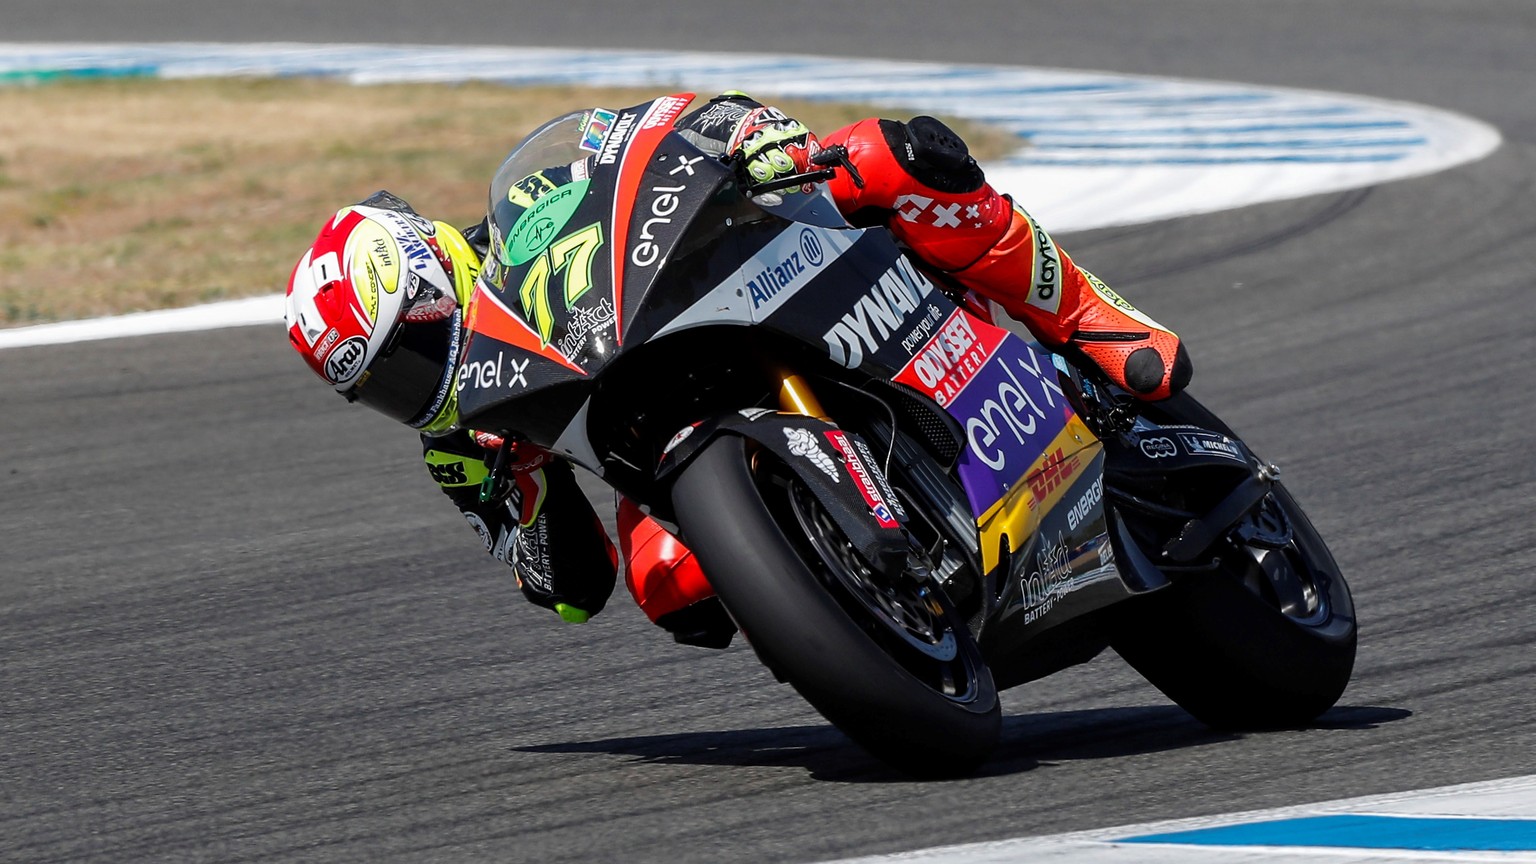 epa08564180 Swiss MotoE rider Dominique Aegerter, Dynavolt Intact GP, in action during the free training session for the motorcycling Grand Prix of Andalusia held at Jerez-Angel Nieto circuit in Jerez ...